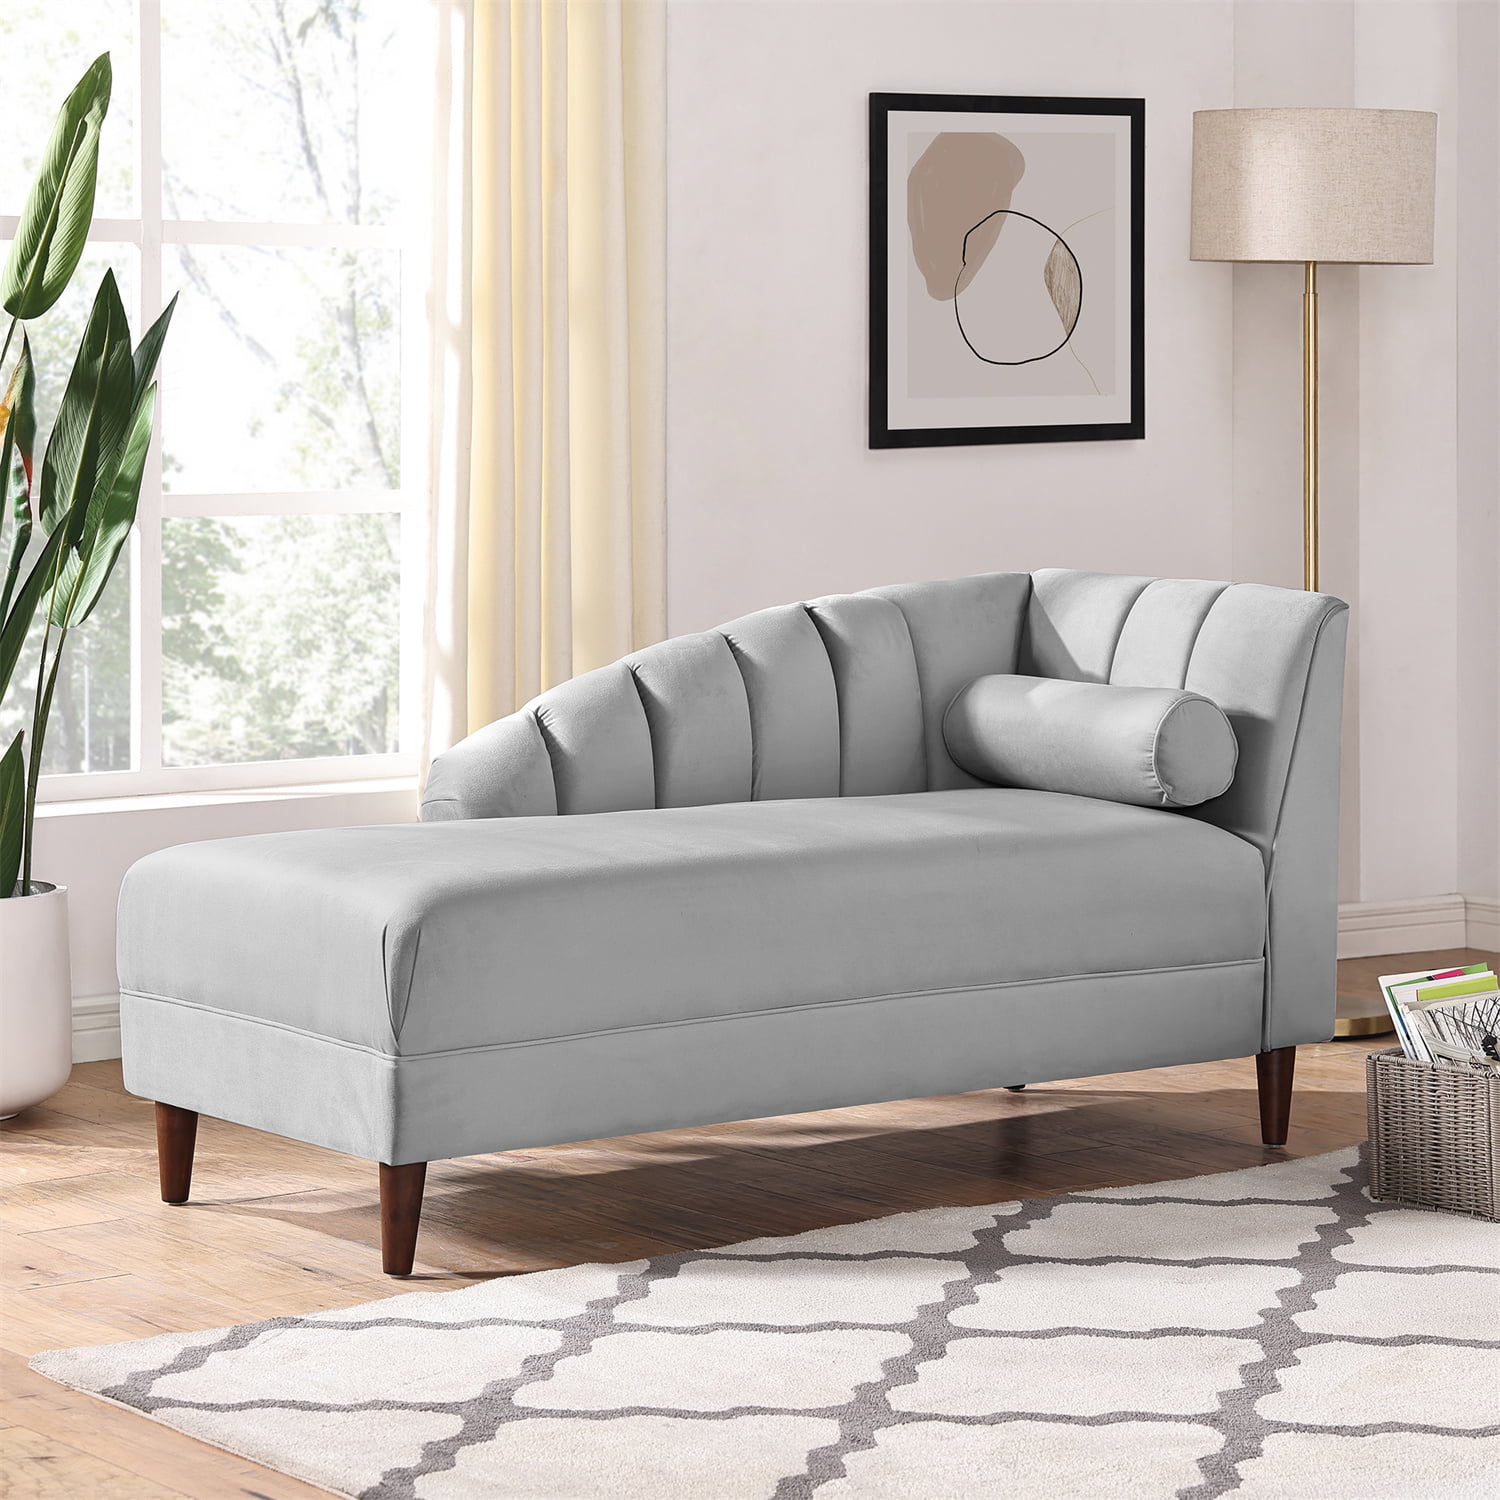 HomSof Chaise, Grey Modern Velvet Indoor, Left Arm Design Lounge Sofa, Reclining Chair Solid Wood Legs with 1 Pillow